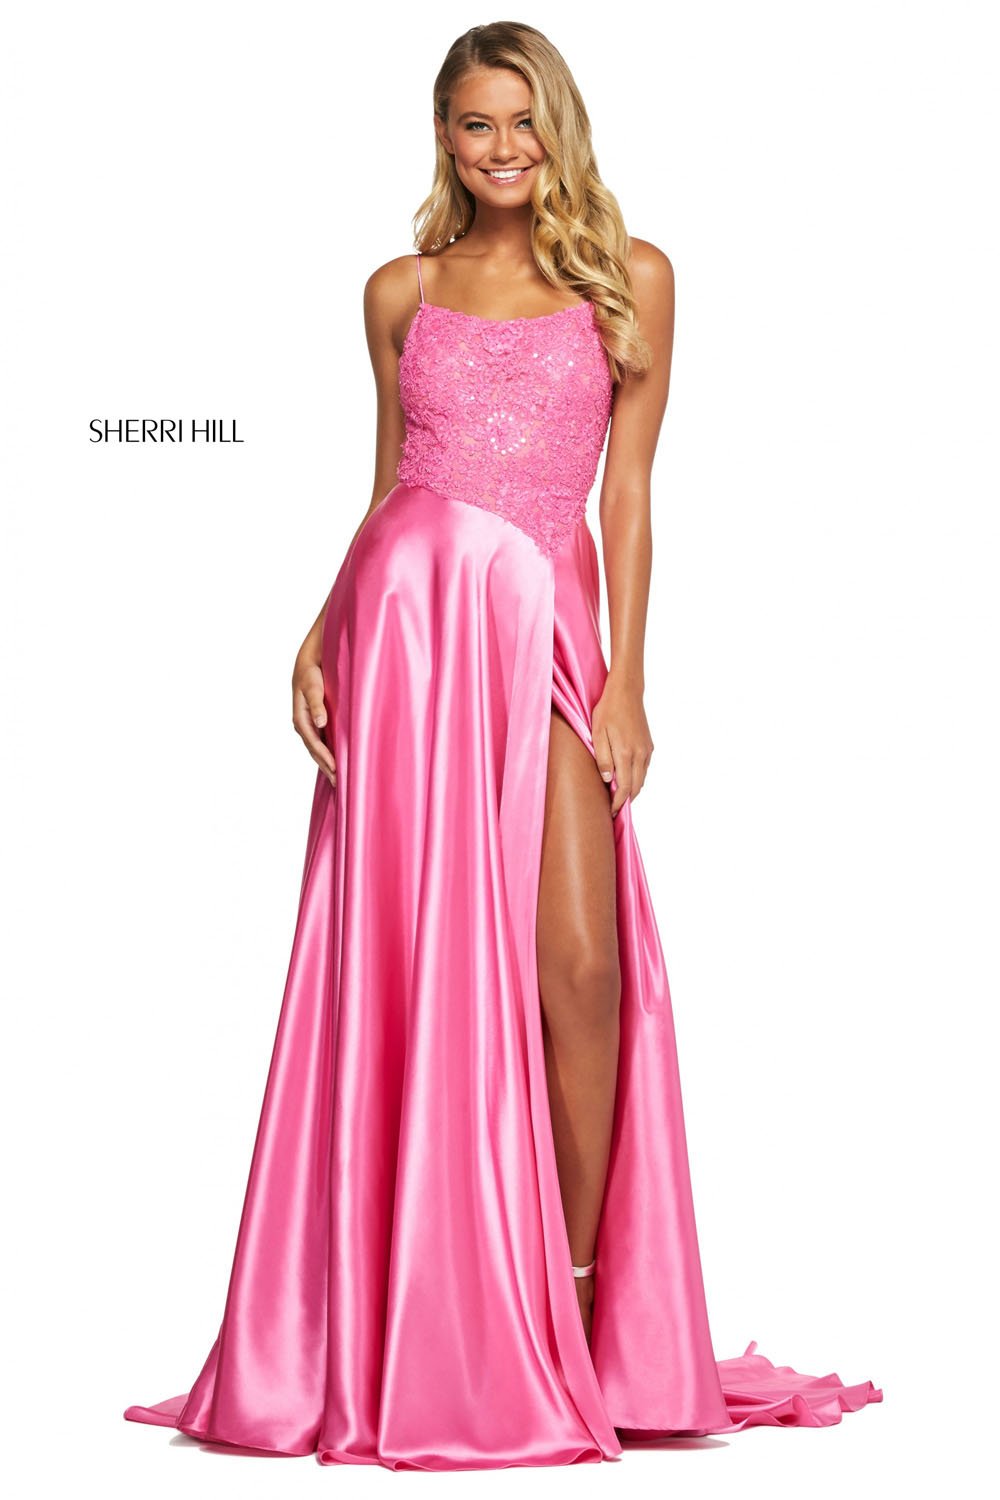 Sherri Hill 53648 dress images in these colors: Yellow, Coral, Lilac, Red, Light Blue, Pink, Rose Gold, Black.